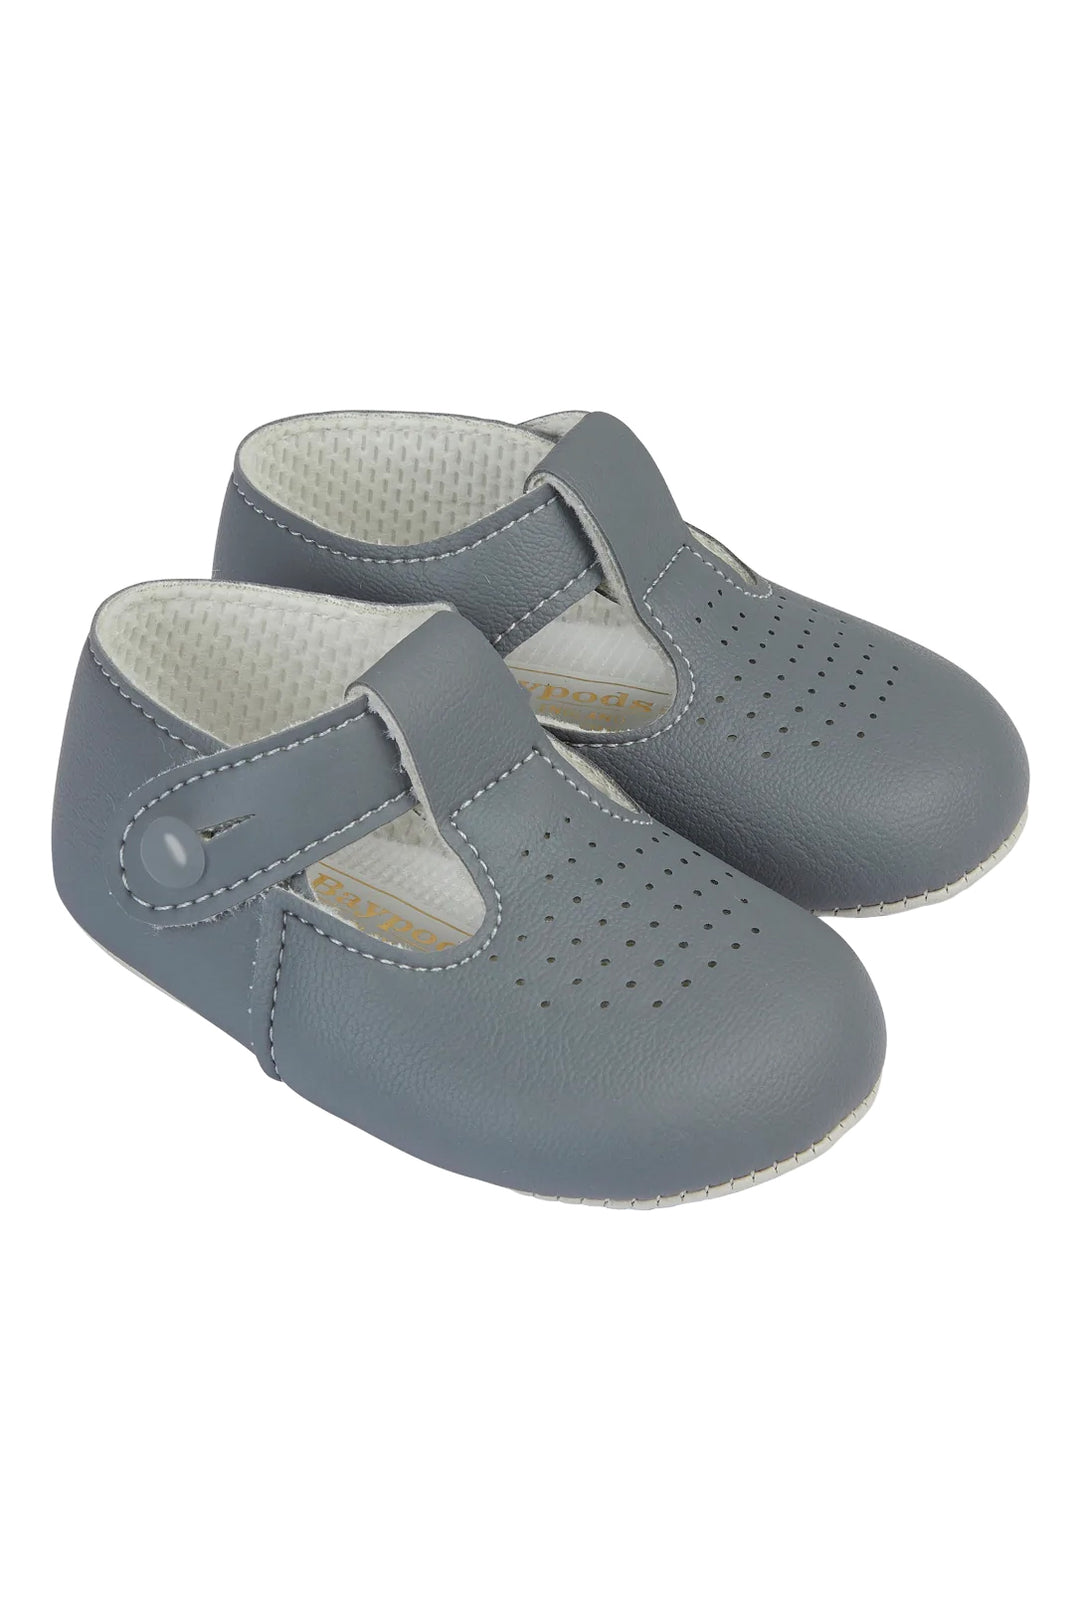 Baypods Grey T-Bar Soft Sole Shoes | iphoneandroidapplications